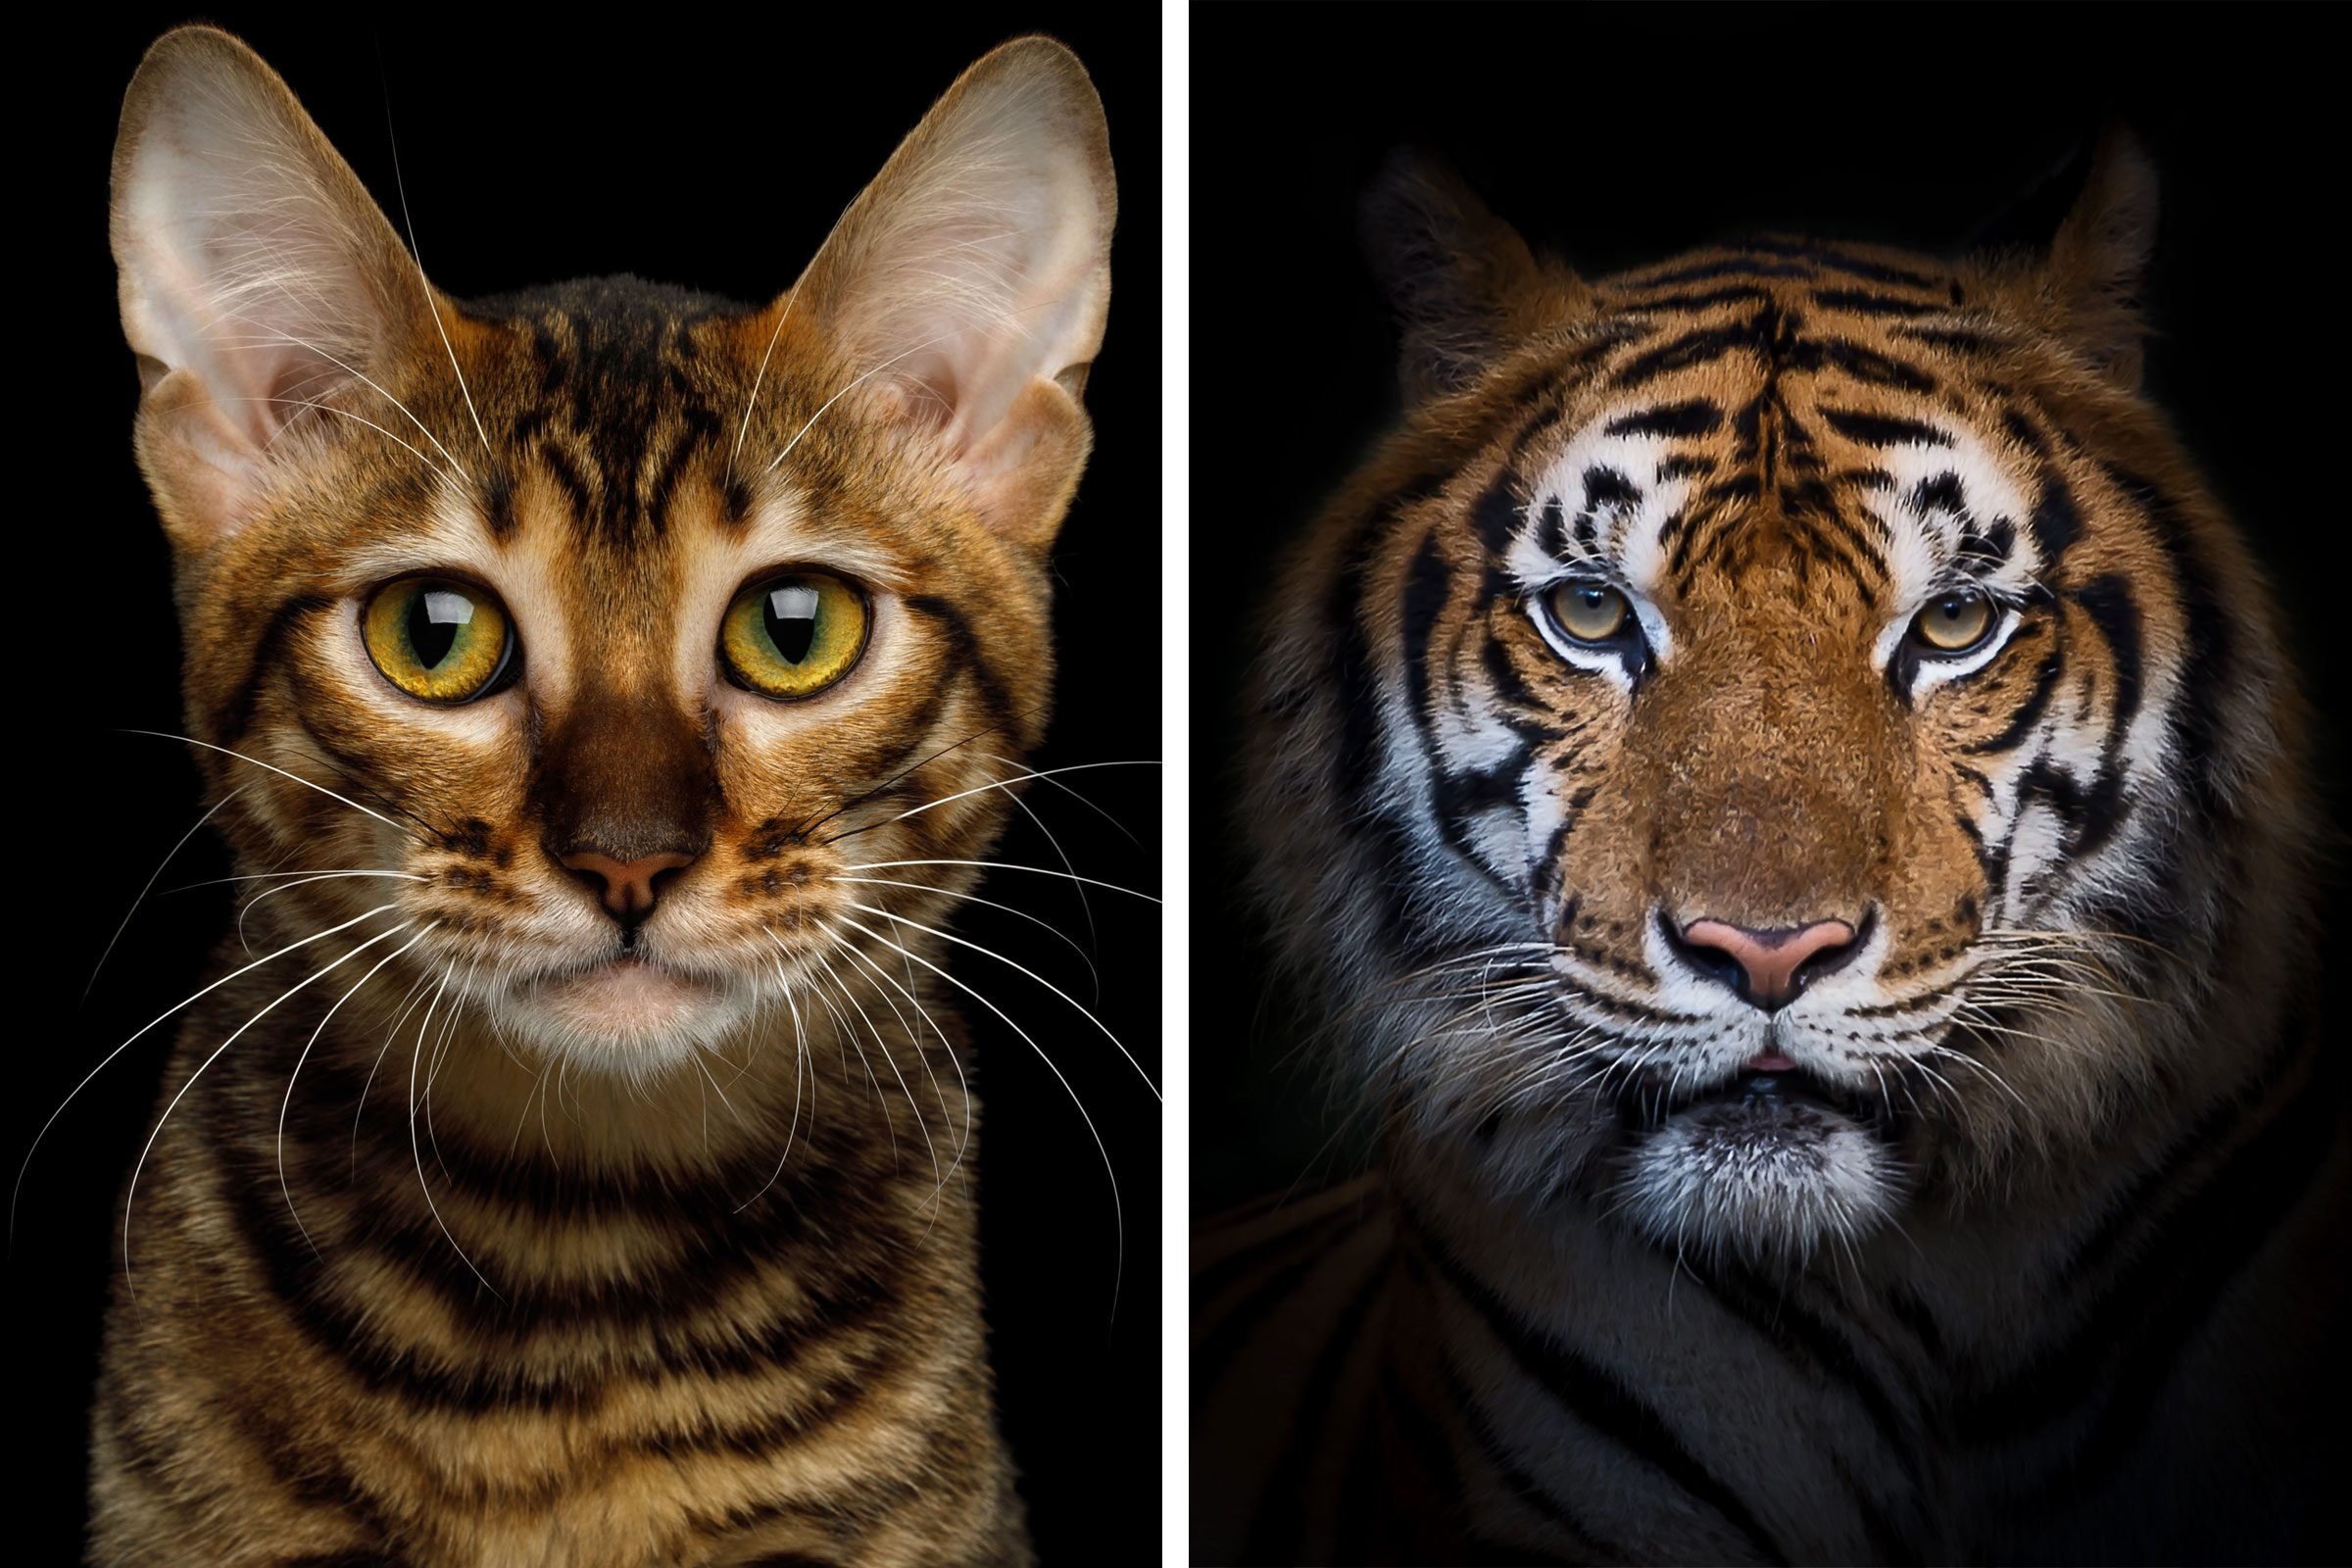 a side by side comparison of a cat and a tiger